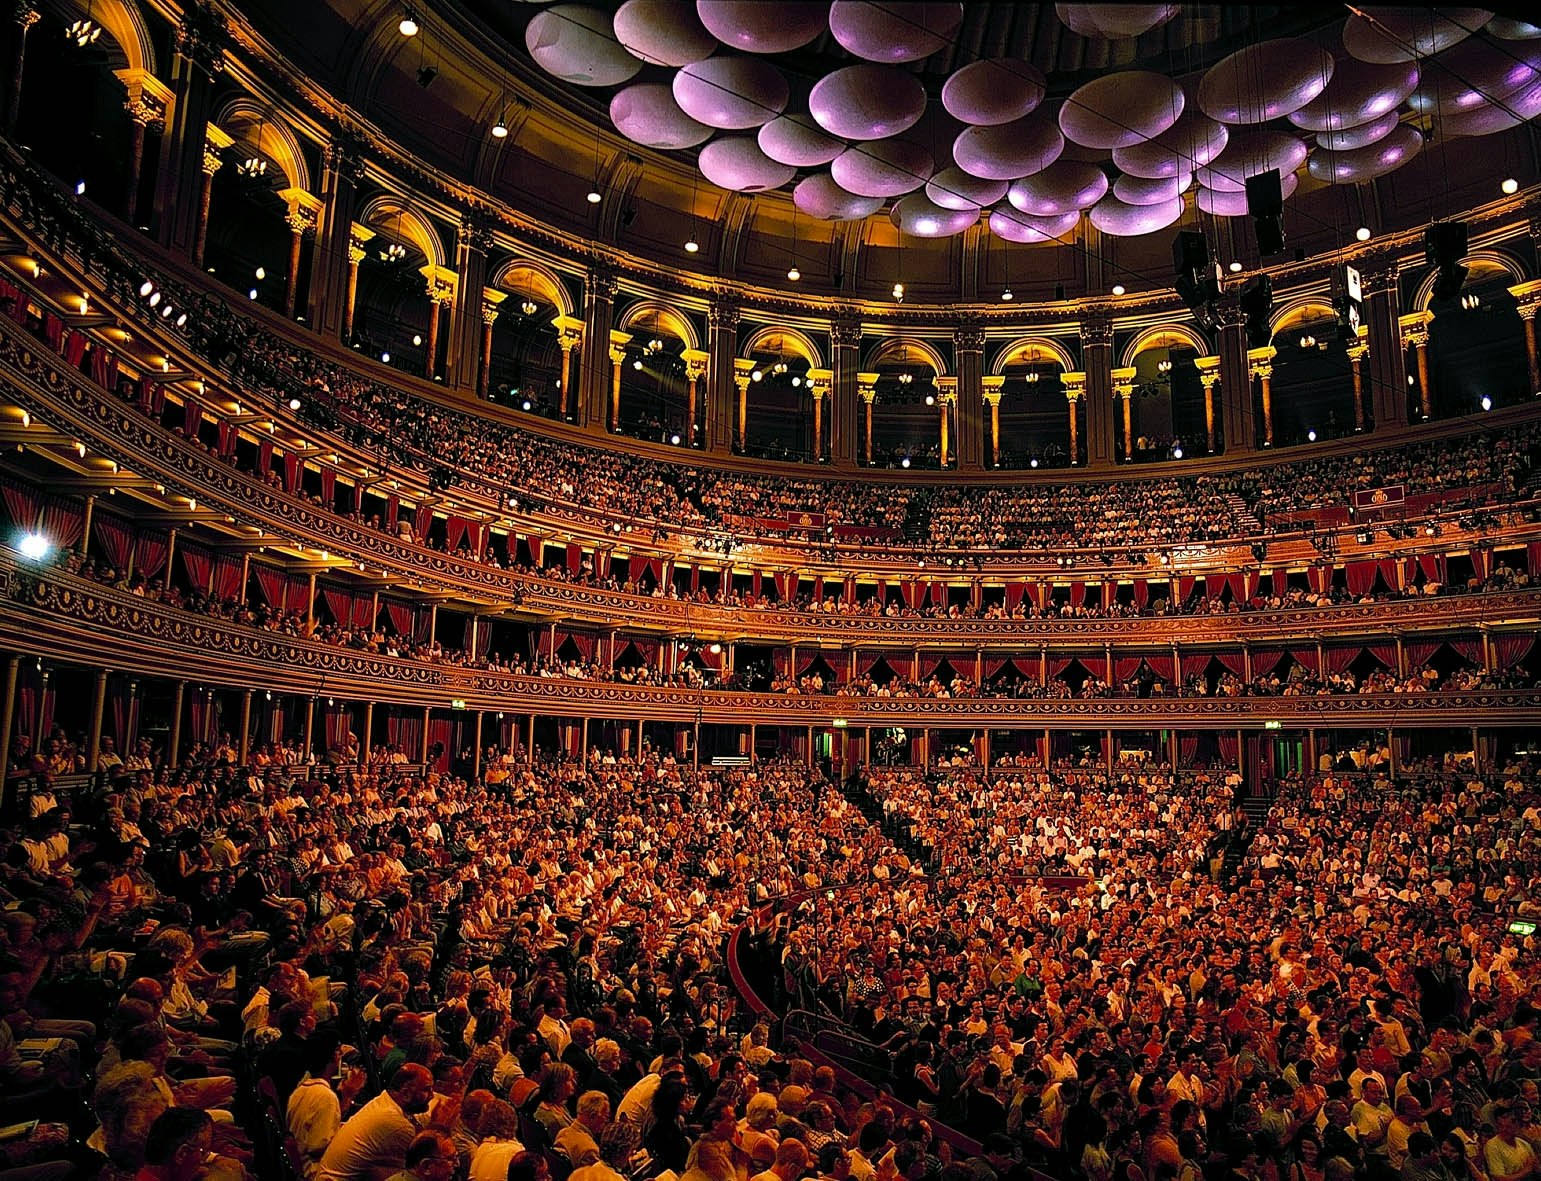 Full house at the Royal Albert Hall, a grand tiered circular venue in London.